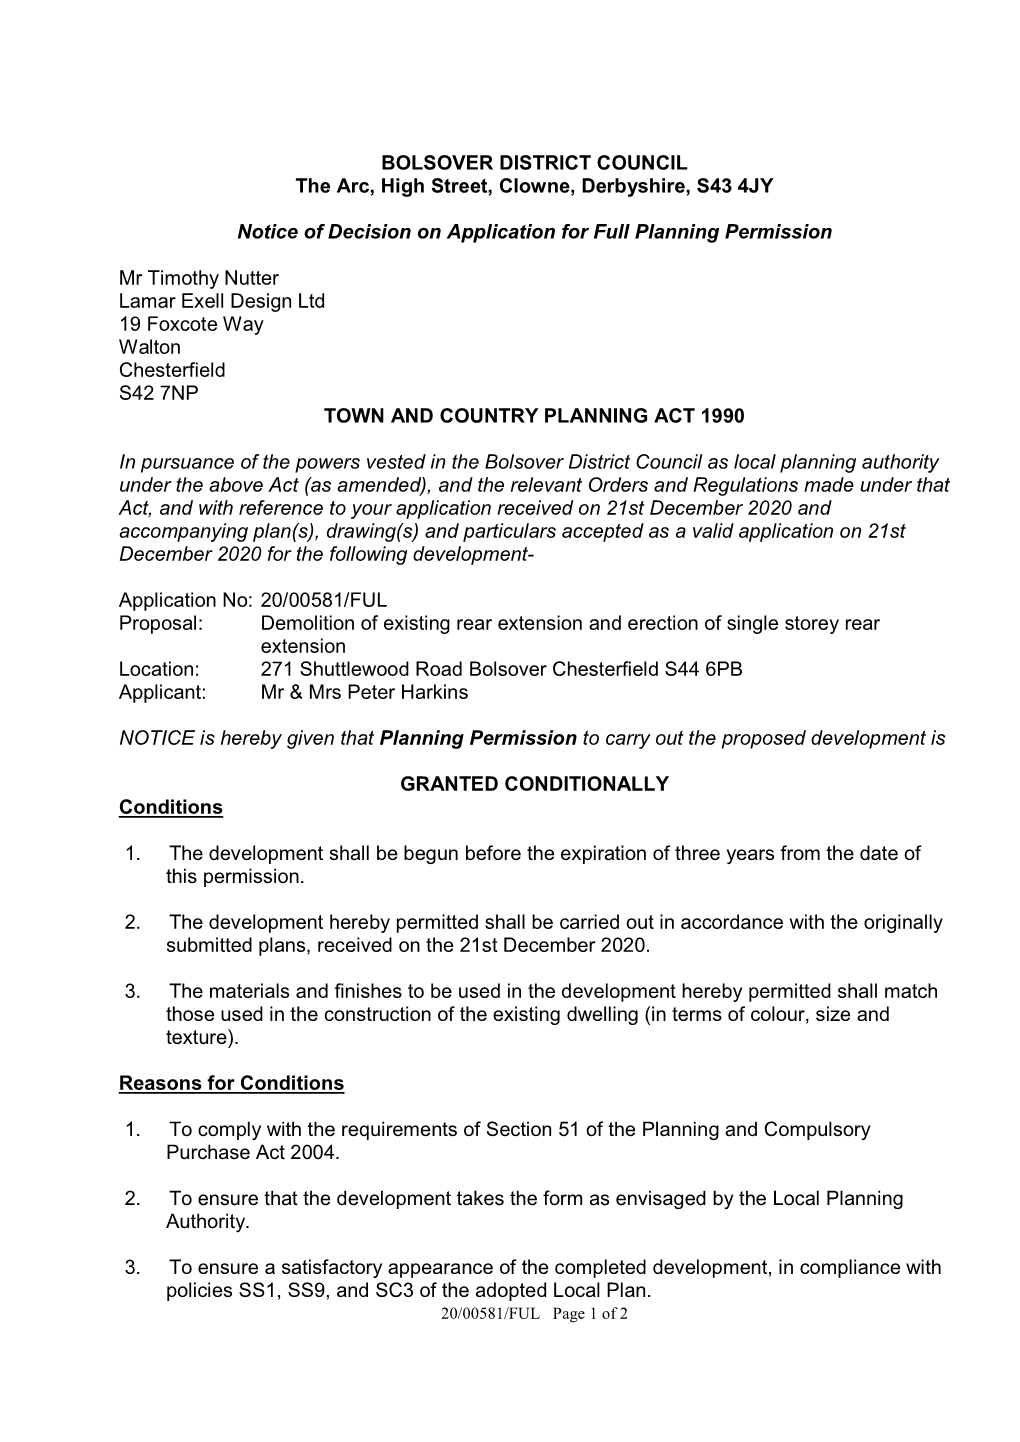 BOLSOVER DISTRICT COUNCIL the Arc, High Street, Clowne, Derbyshire, S43 4JY Notice of Decision on Application for Full Planning